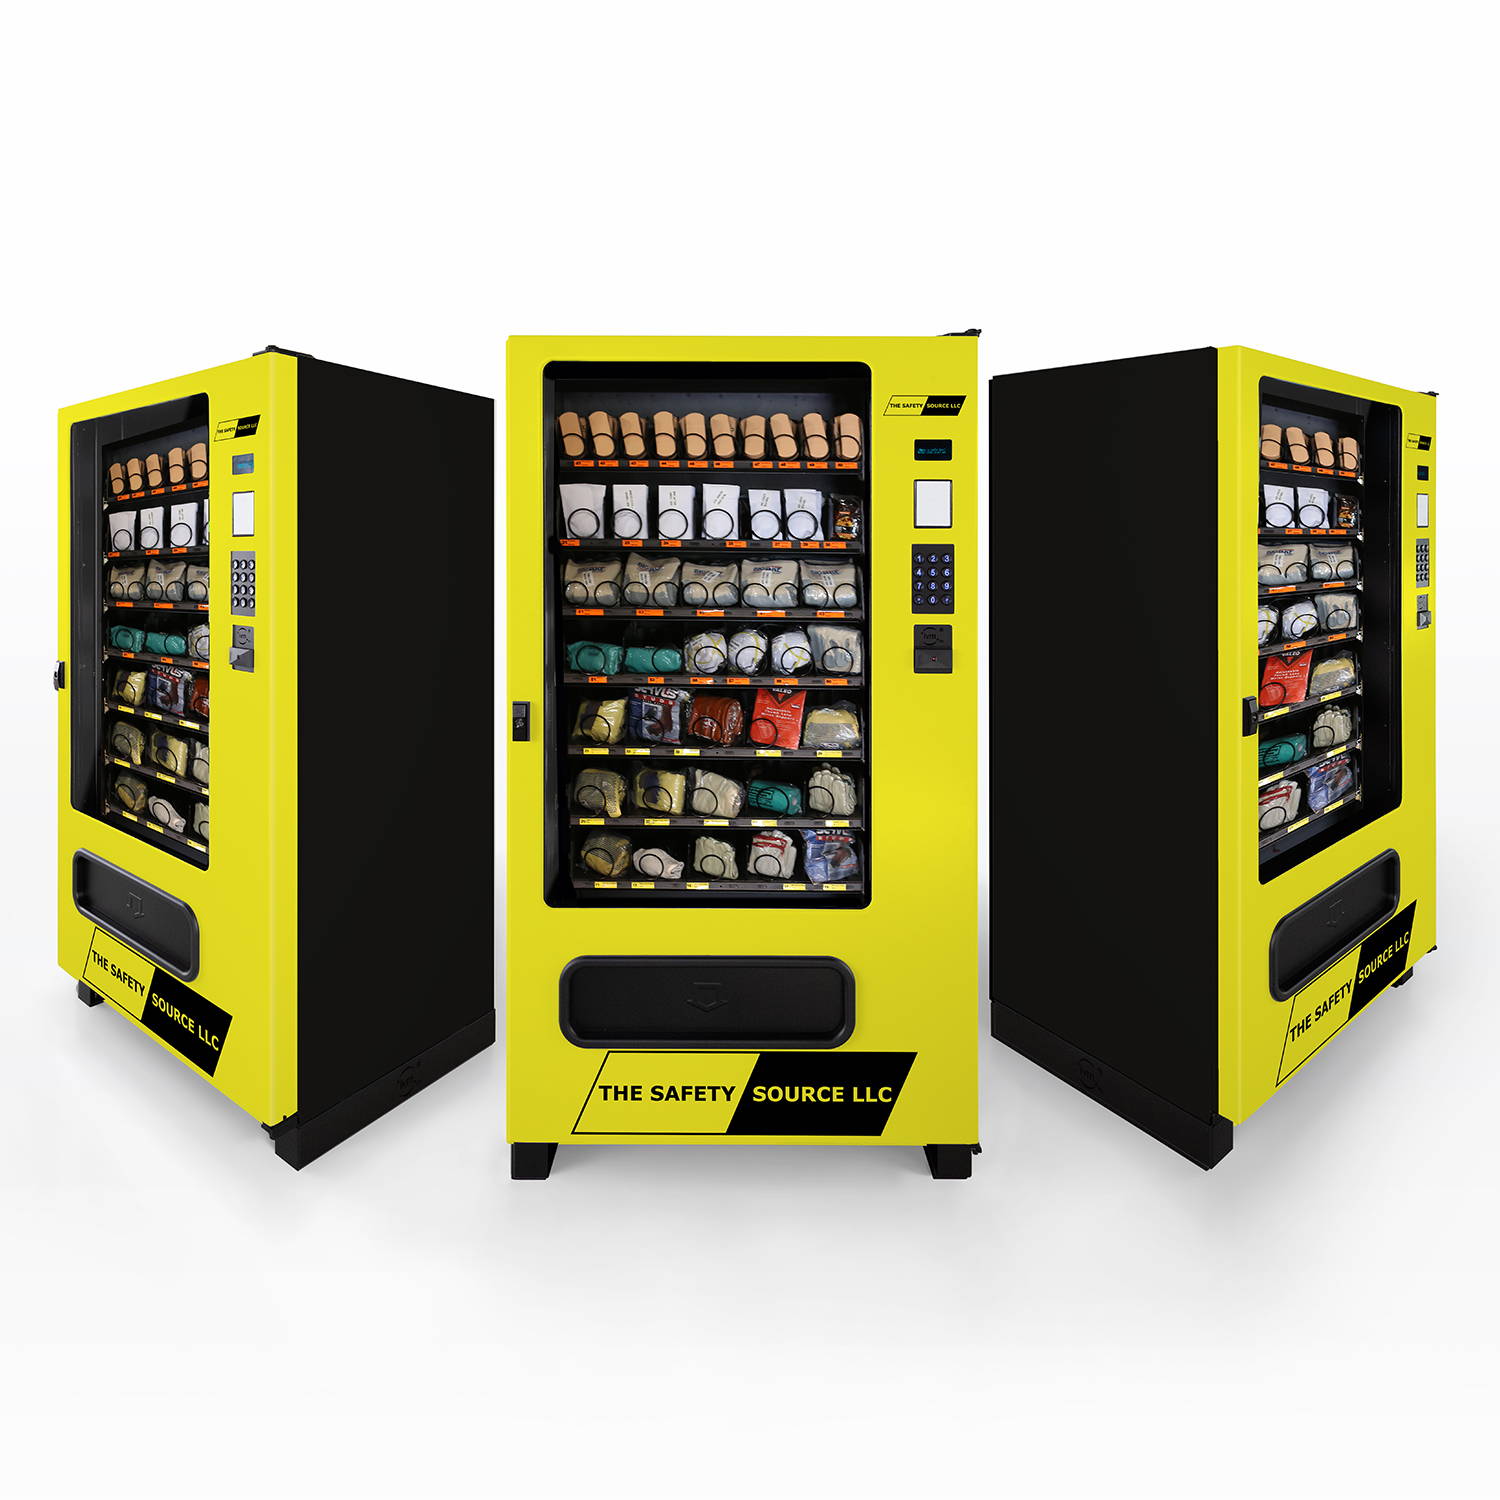 Three Safety Source PPE Vending Machines showcasing various ppe items.